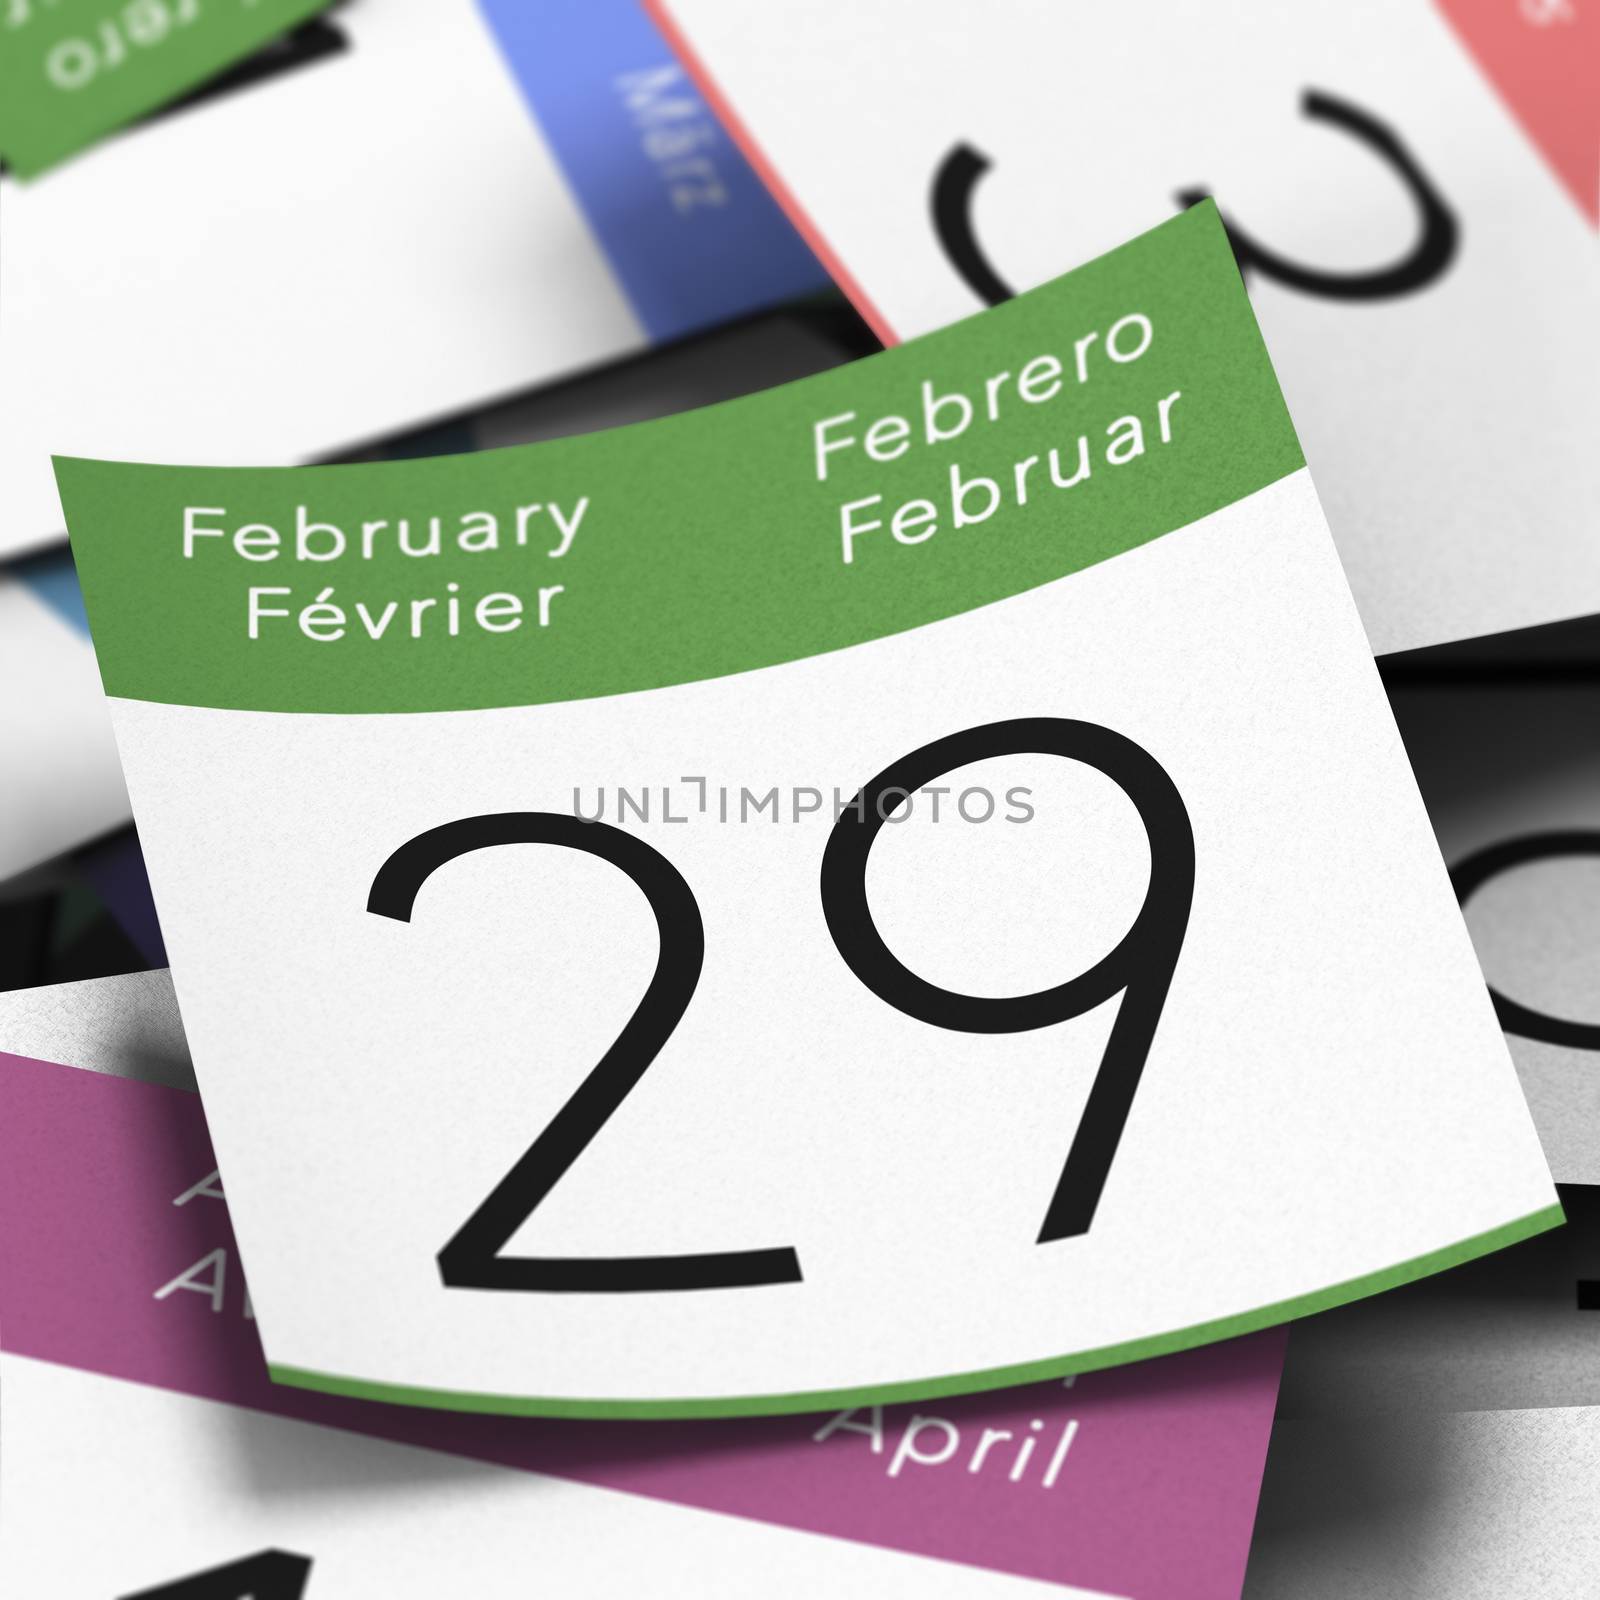 Calendar where it's written february 29th with a blue thumbtack, leap year day image